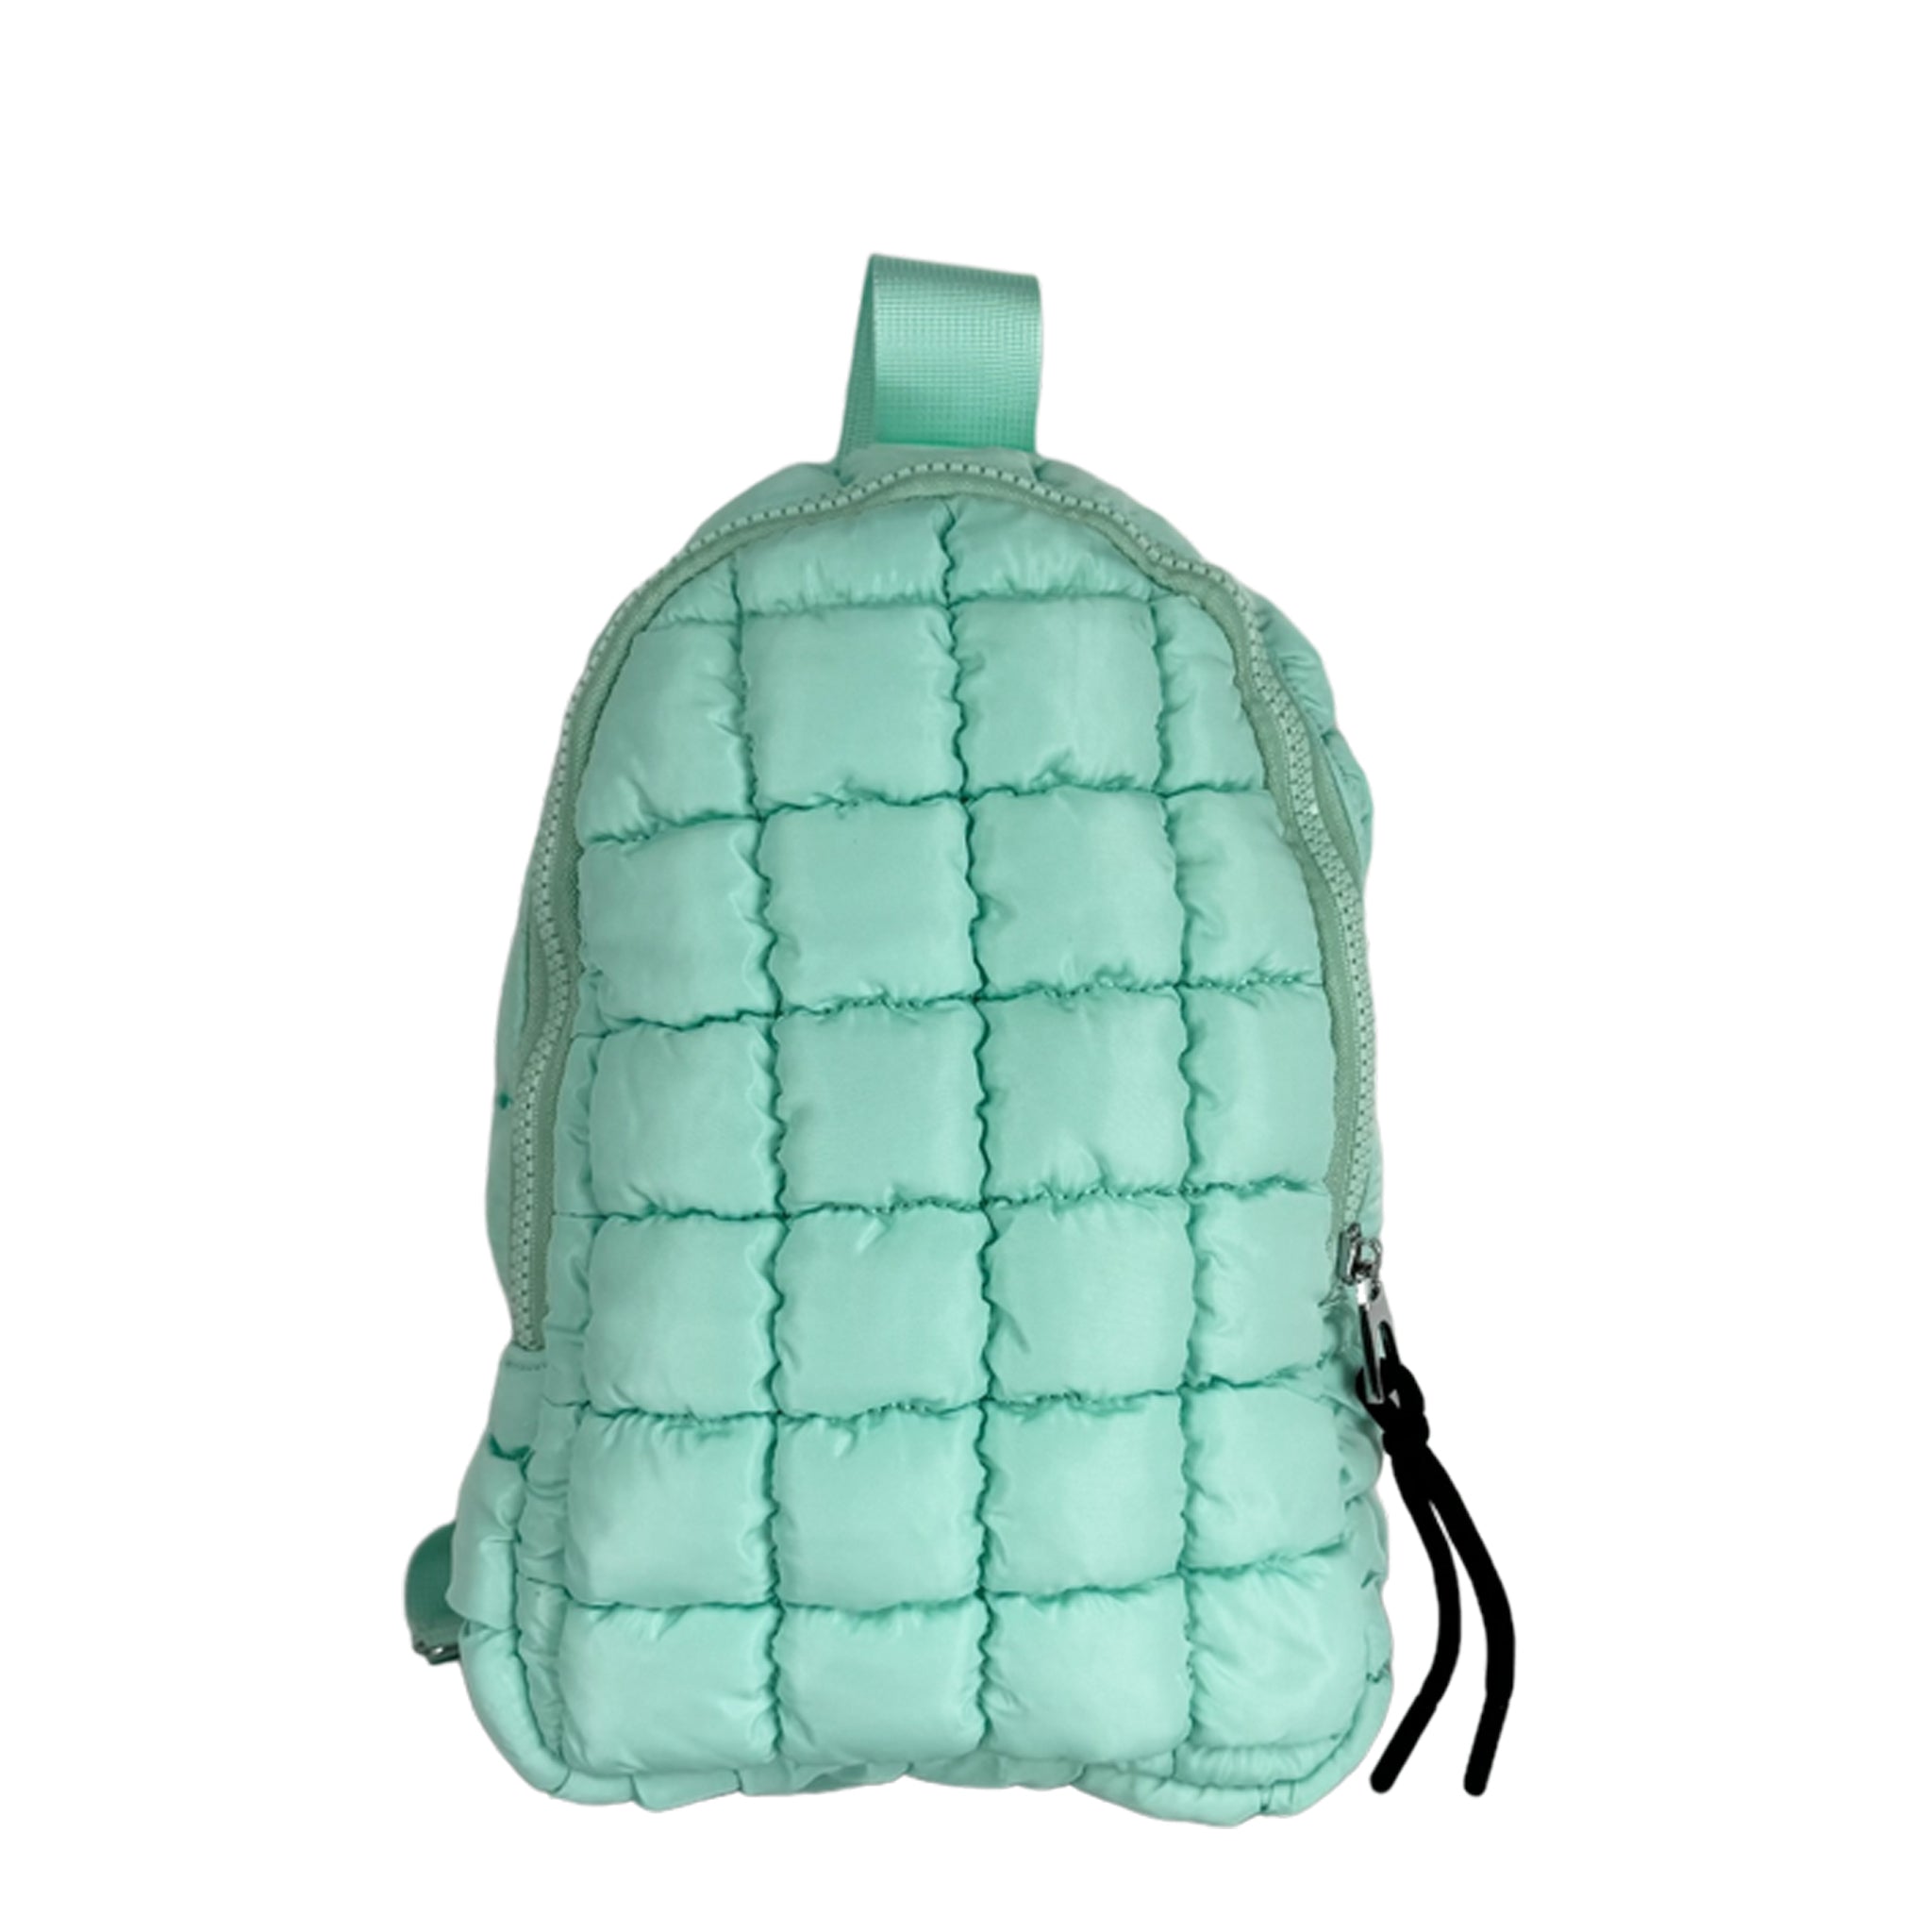 GZ-7413 Puffer Quilted Crossbody Mint